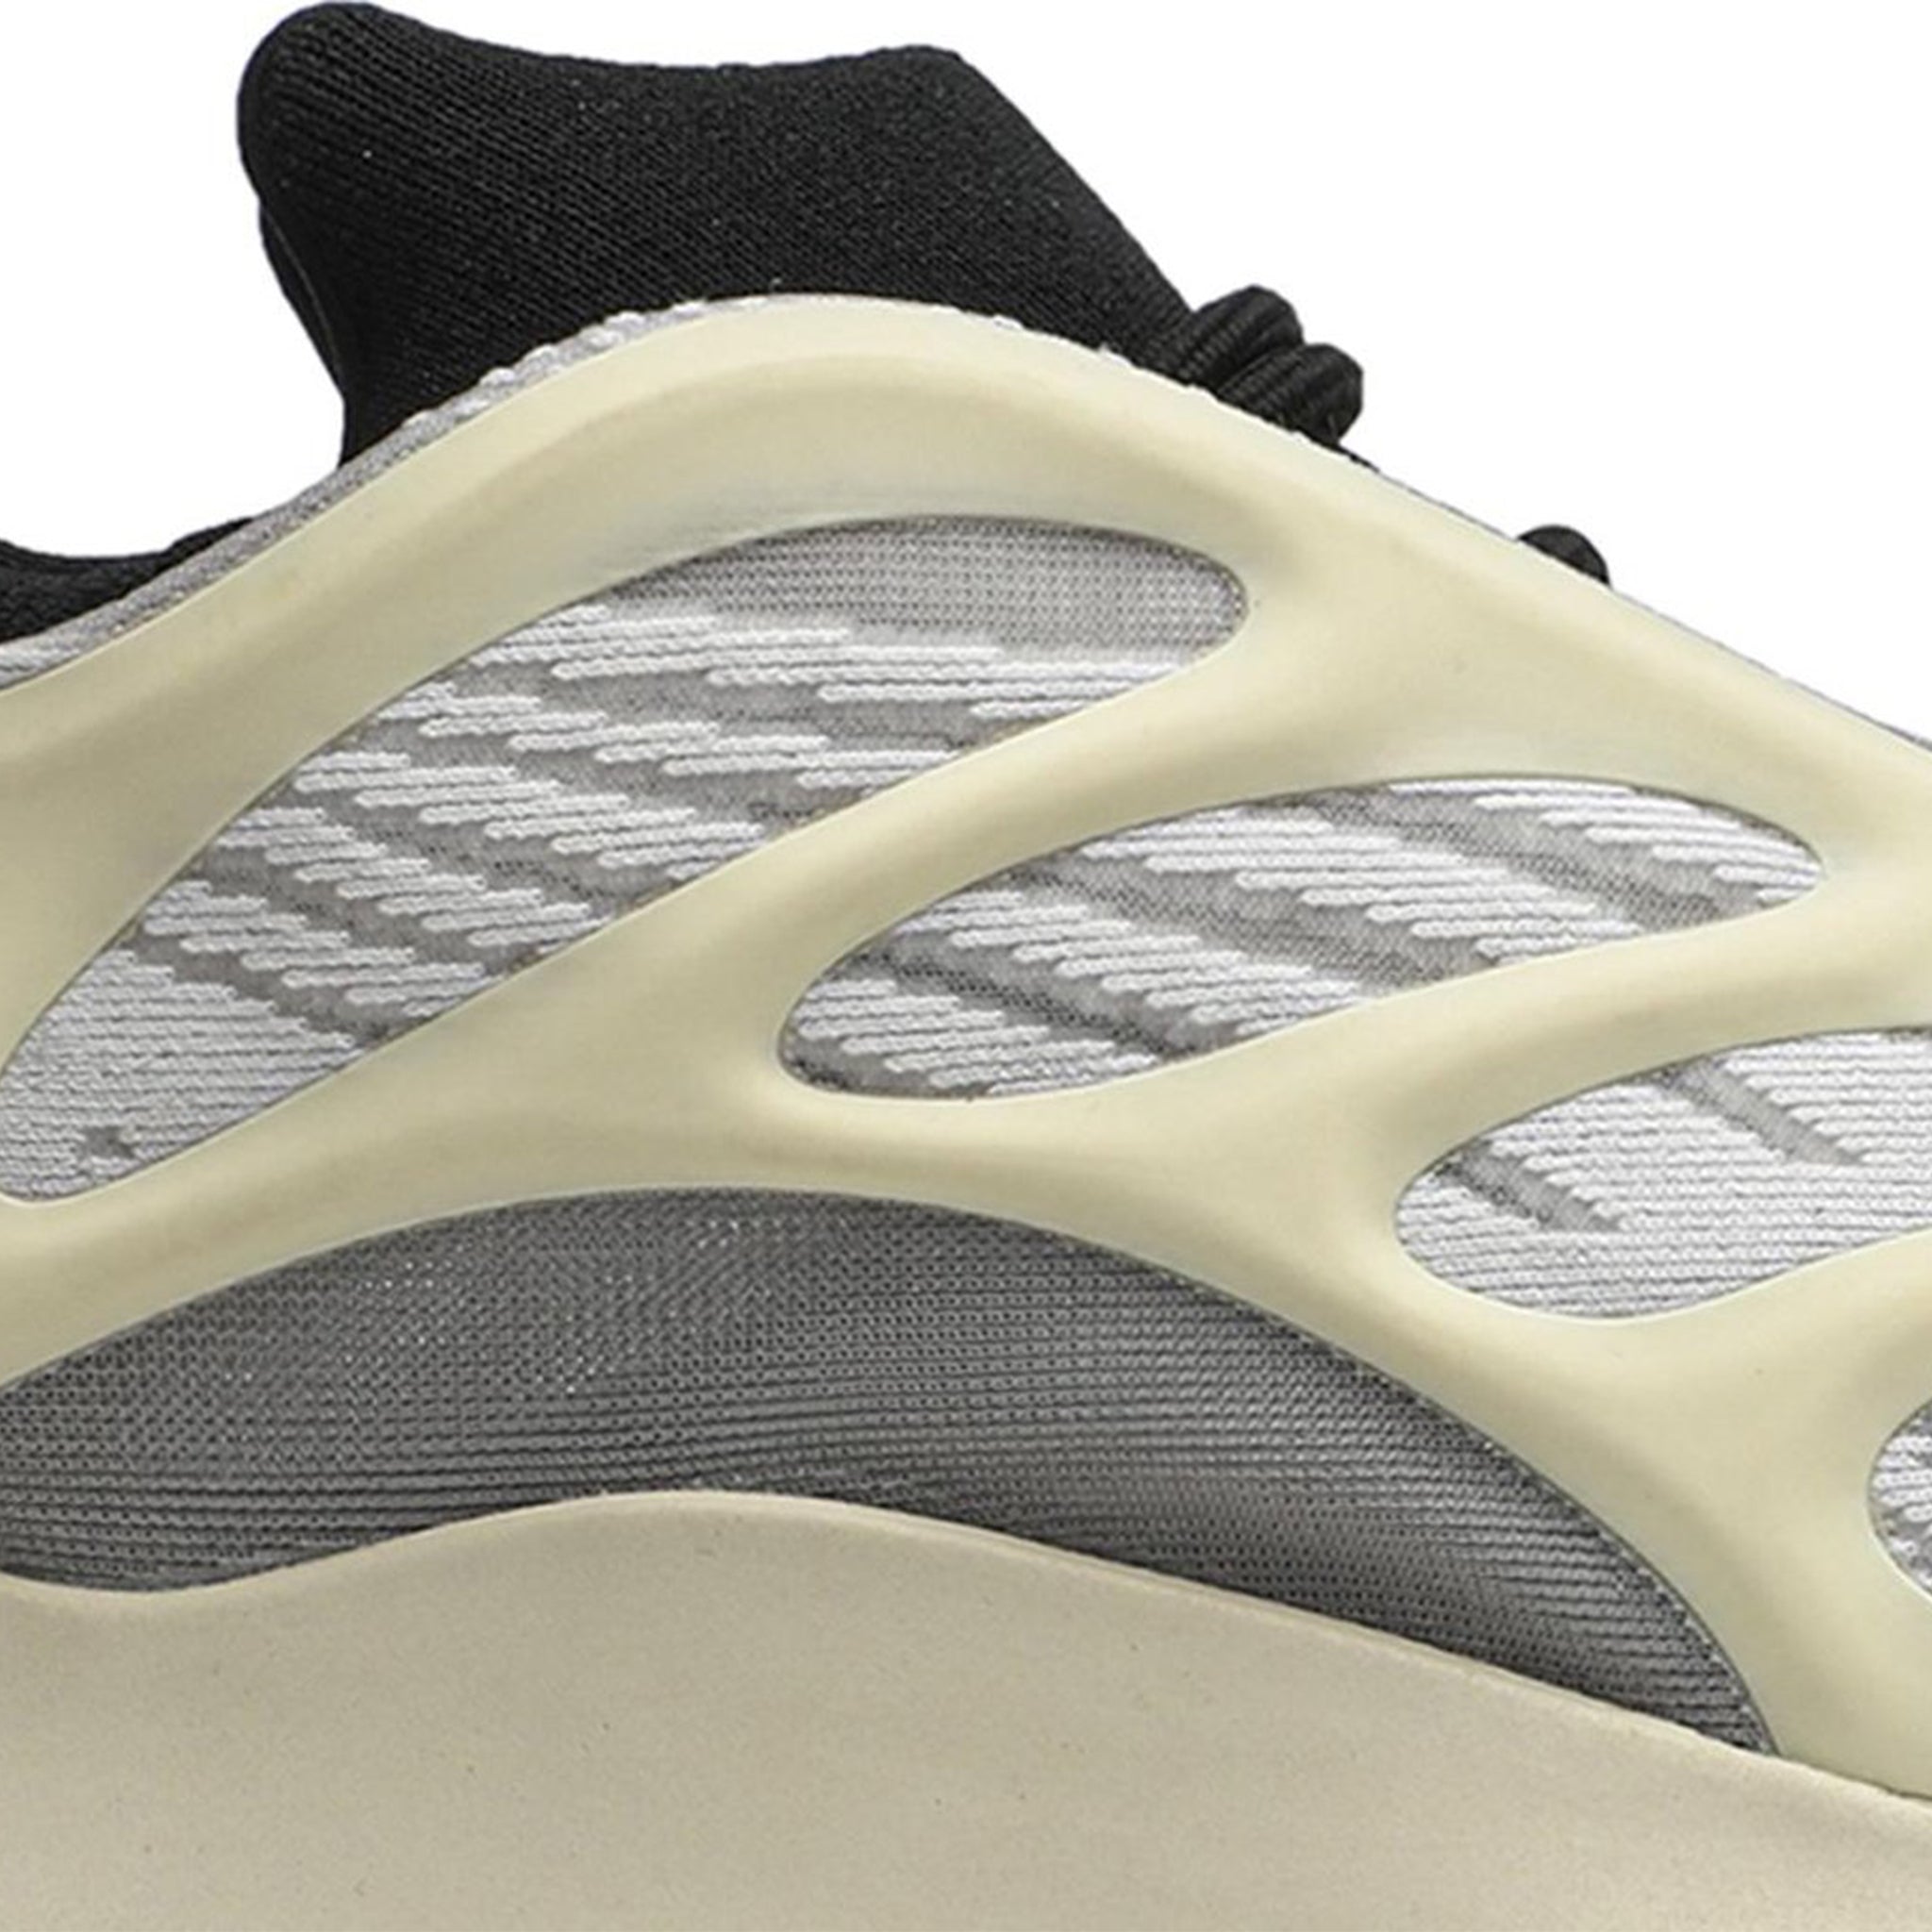 Detail view of Adidas Yeezy Boost 700 V3 Azael (2019/2022/2023)